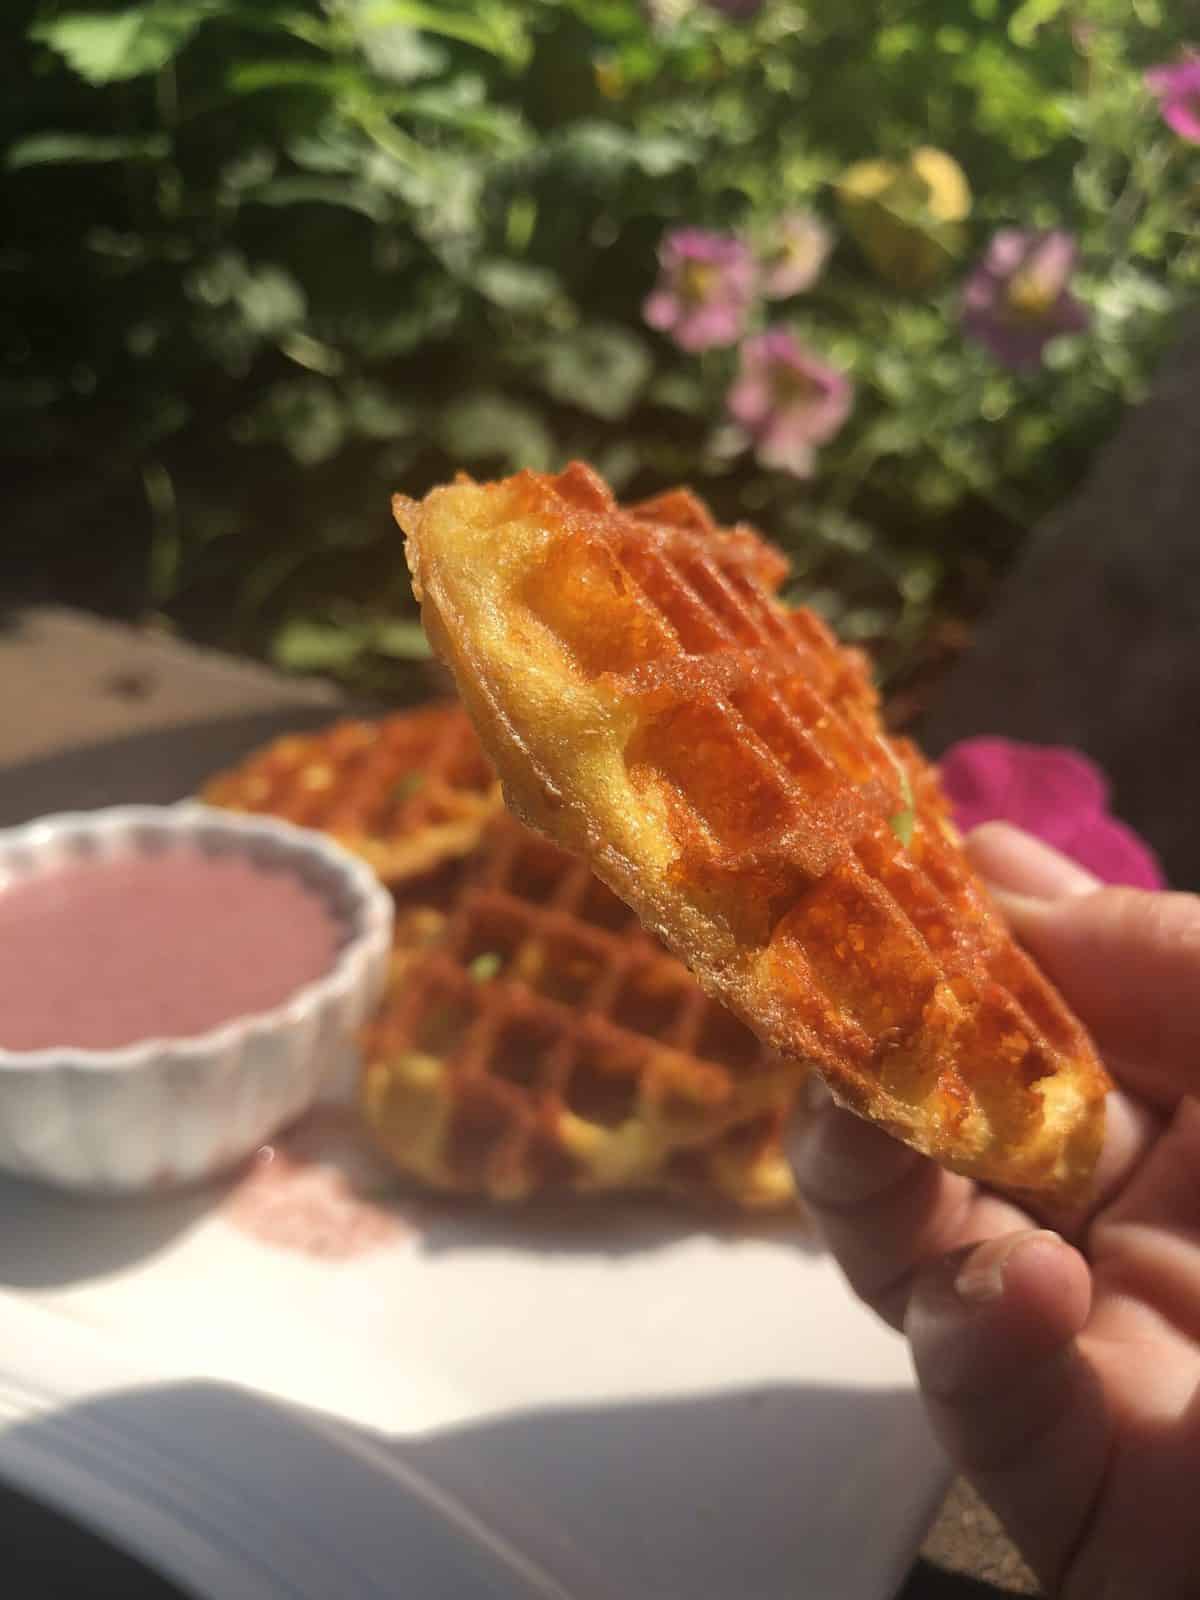 A keto friendly chaffle in a hand being held in a garden next to a bowl of strawberry puree